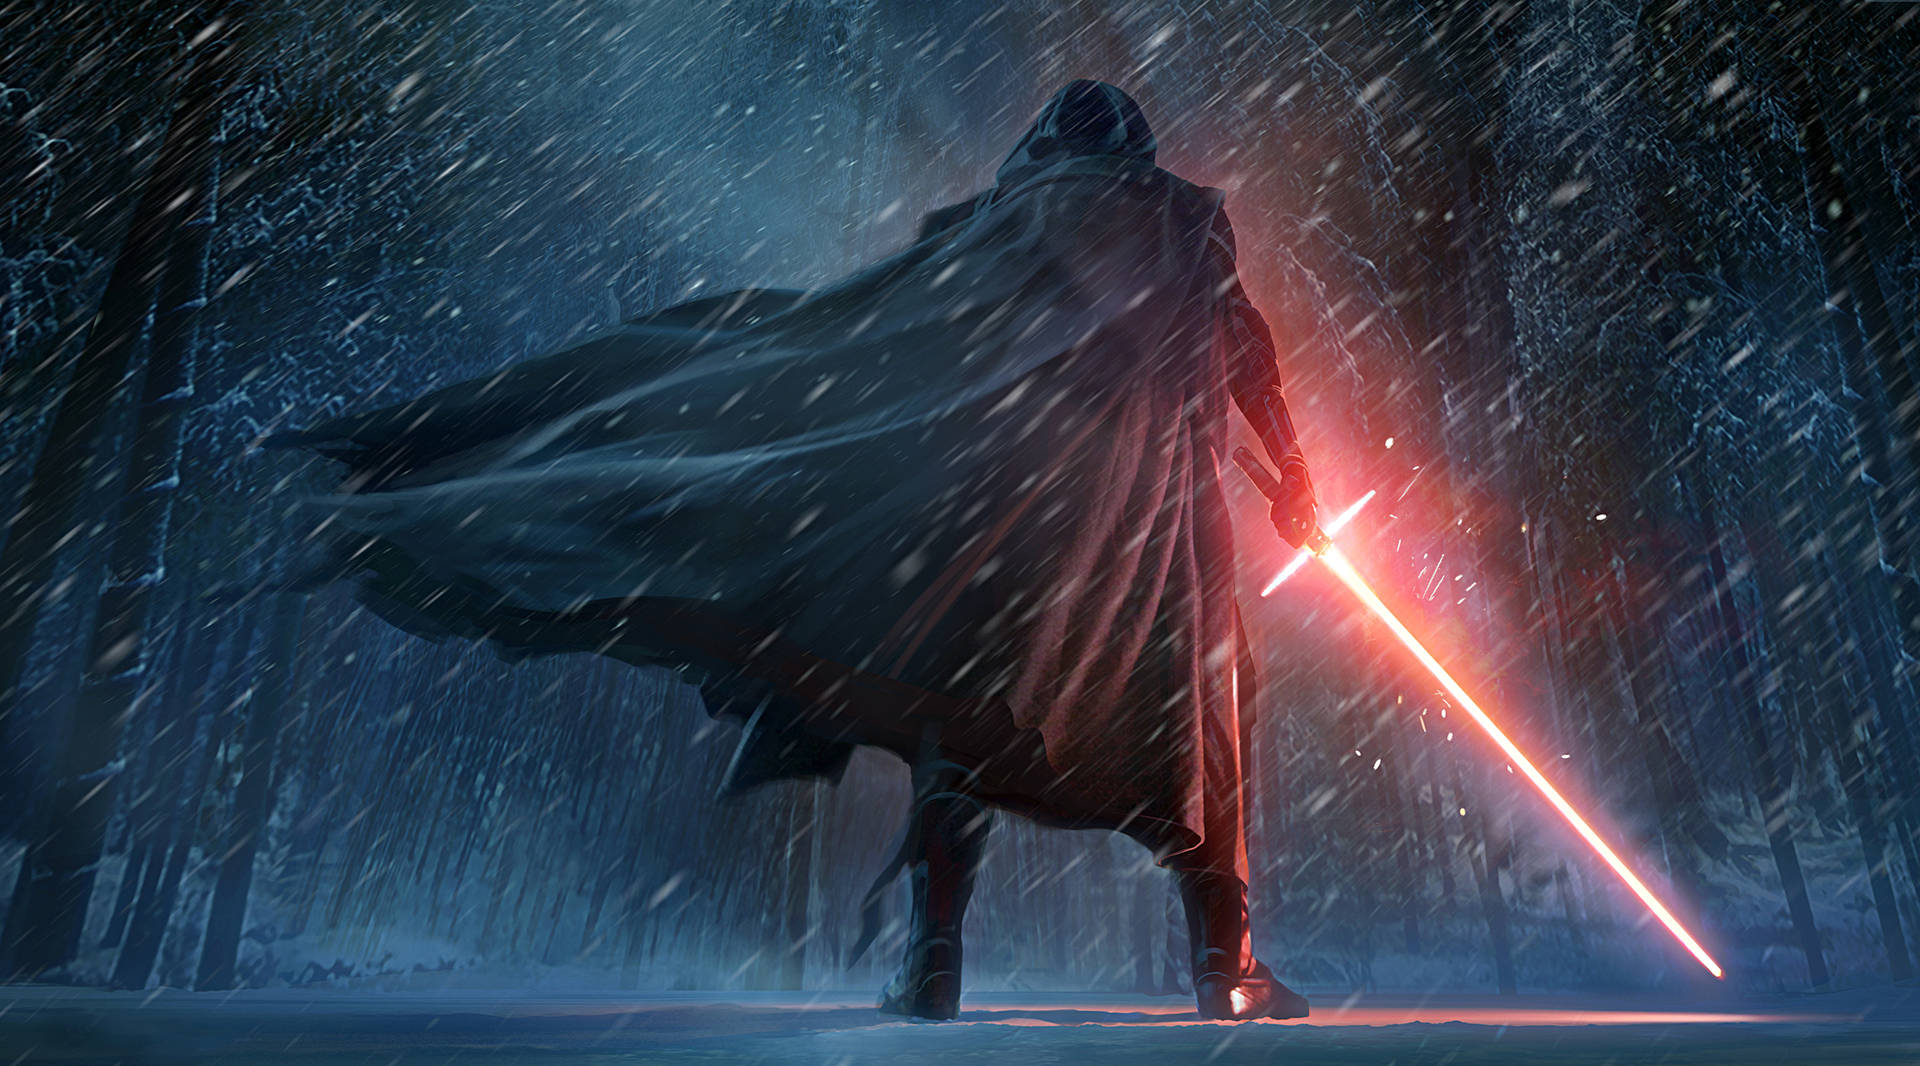 Experience the Magic of Star Wars in an Epic Landscape Wallpaper